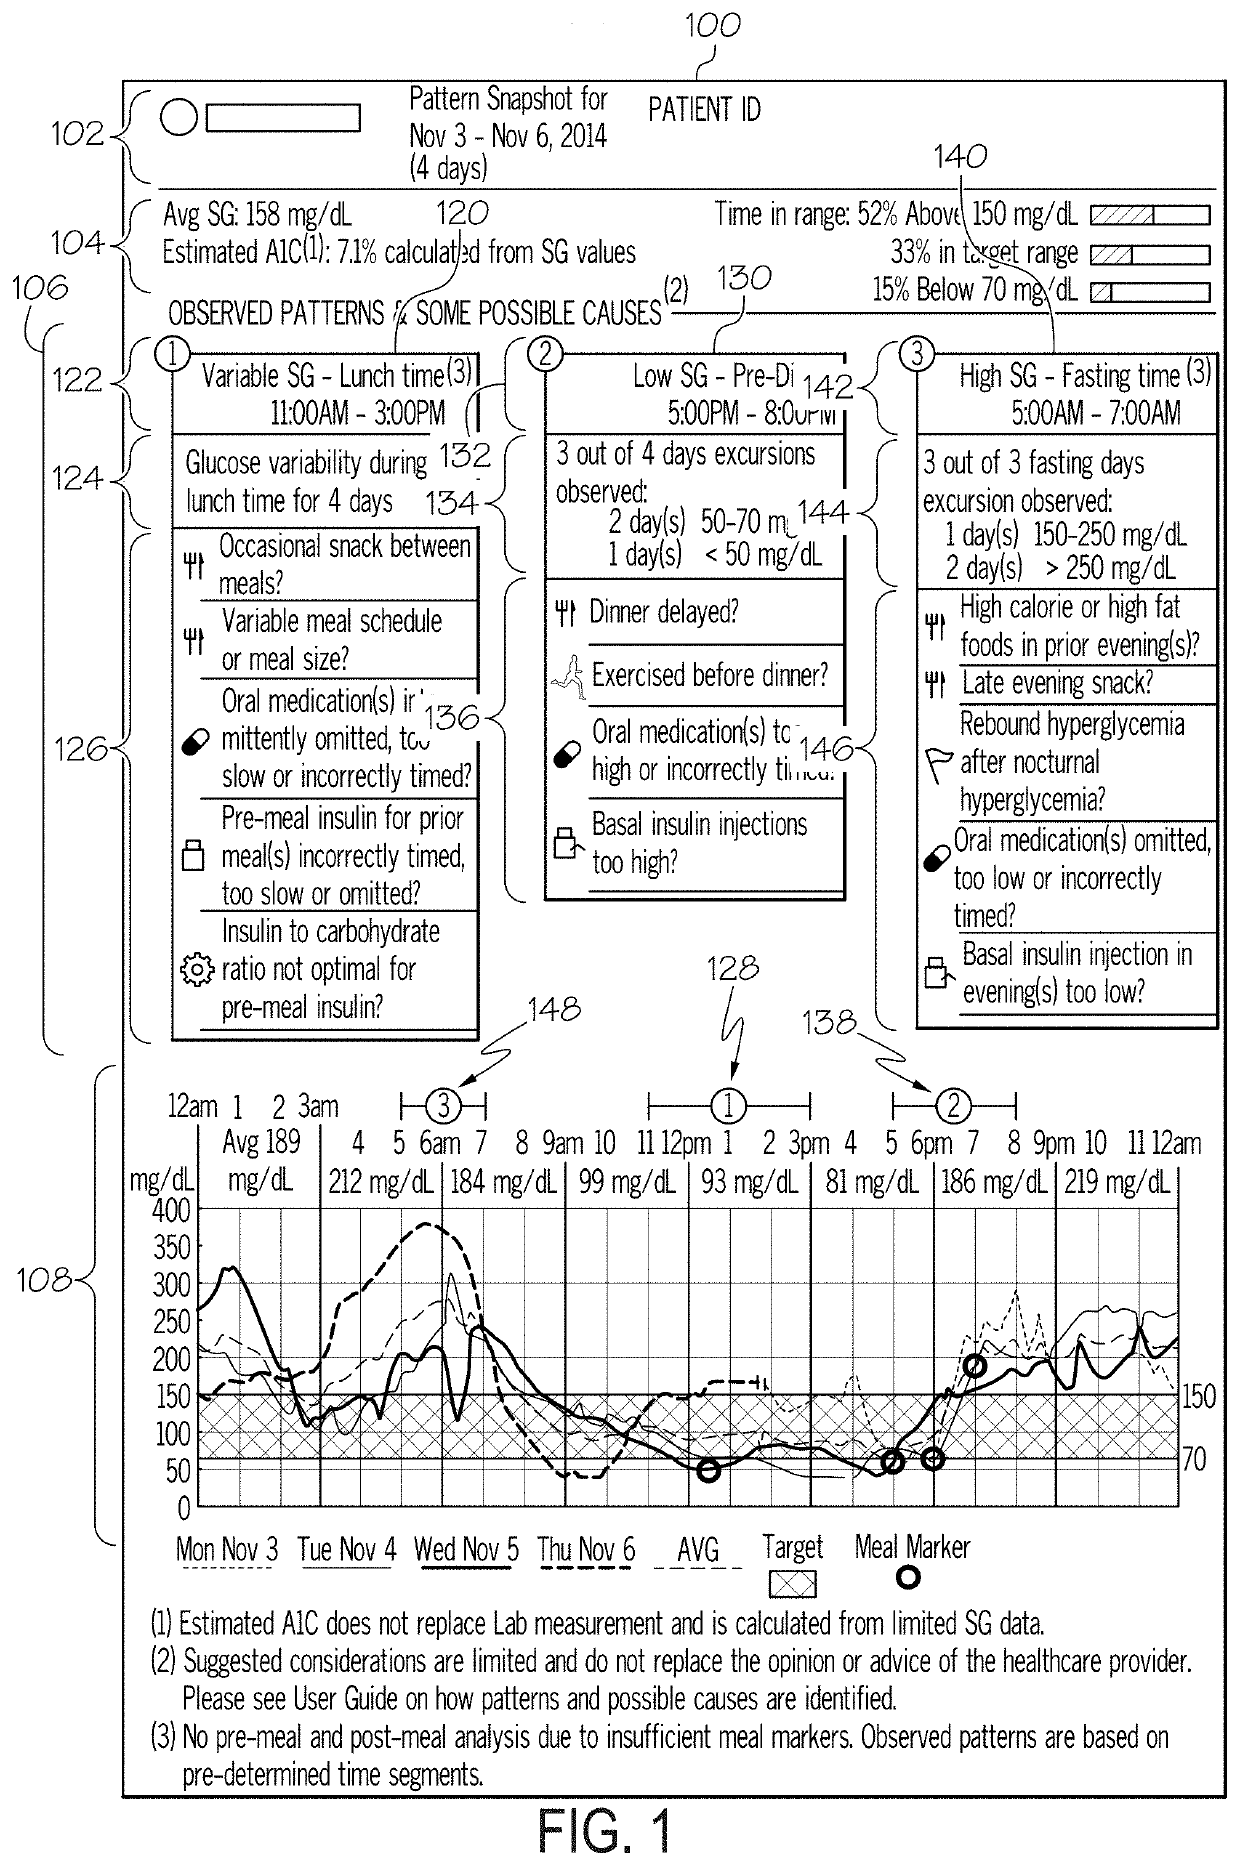 Medical devices and related event pattern presentation methods